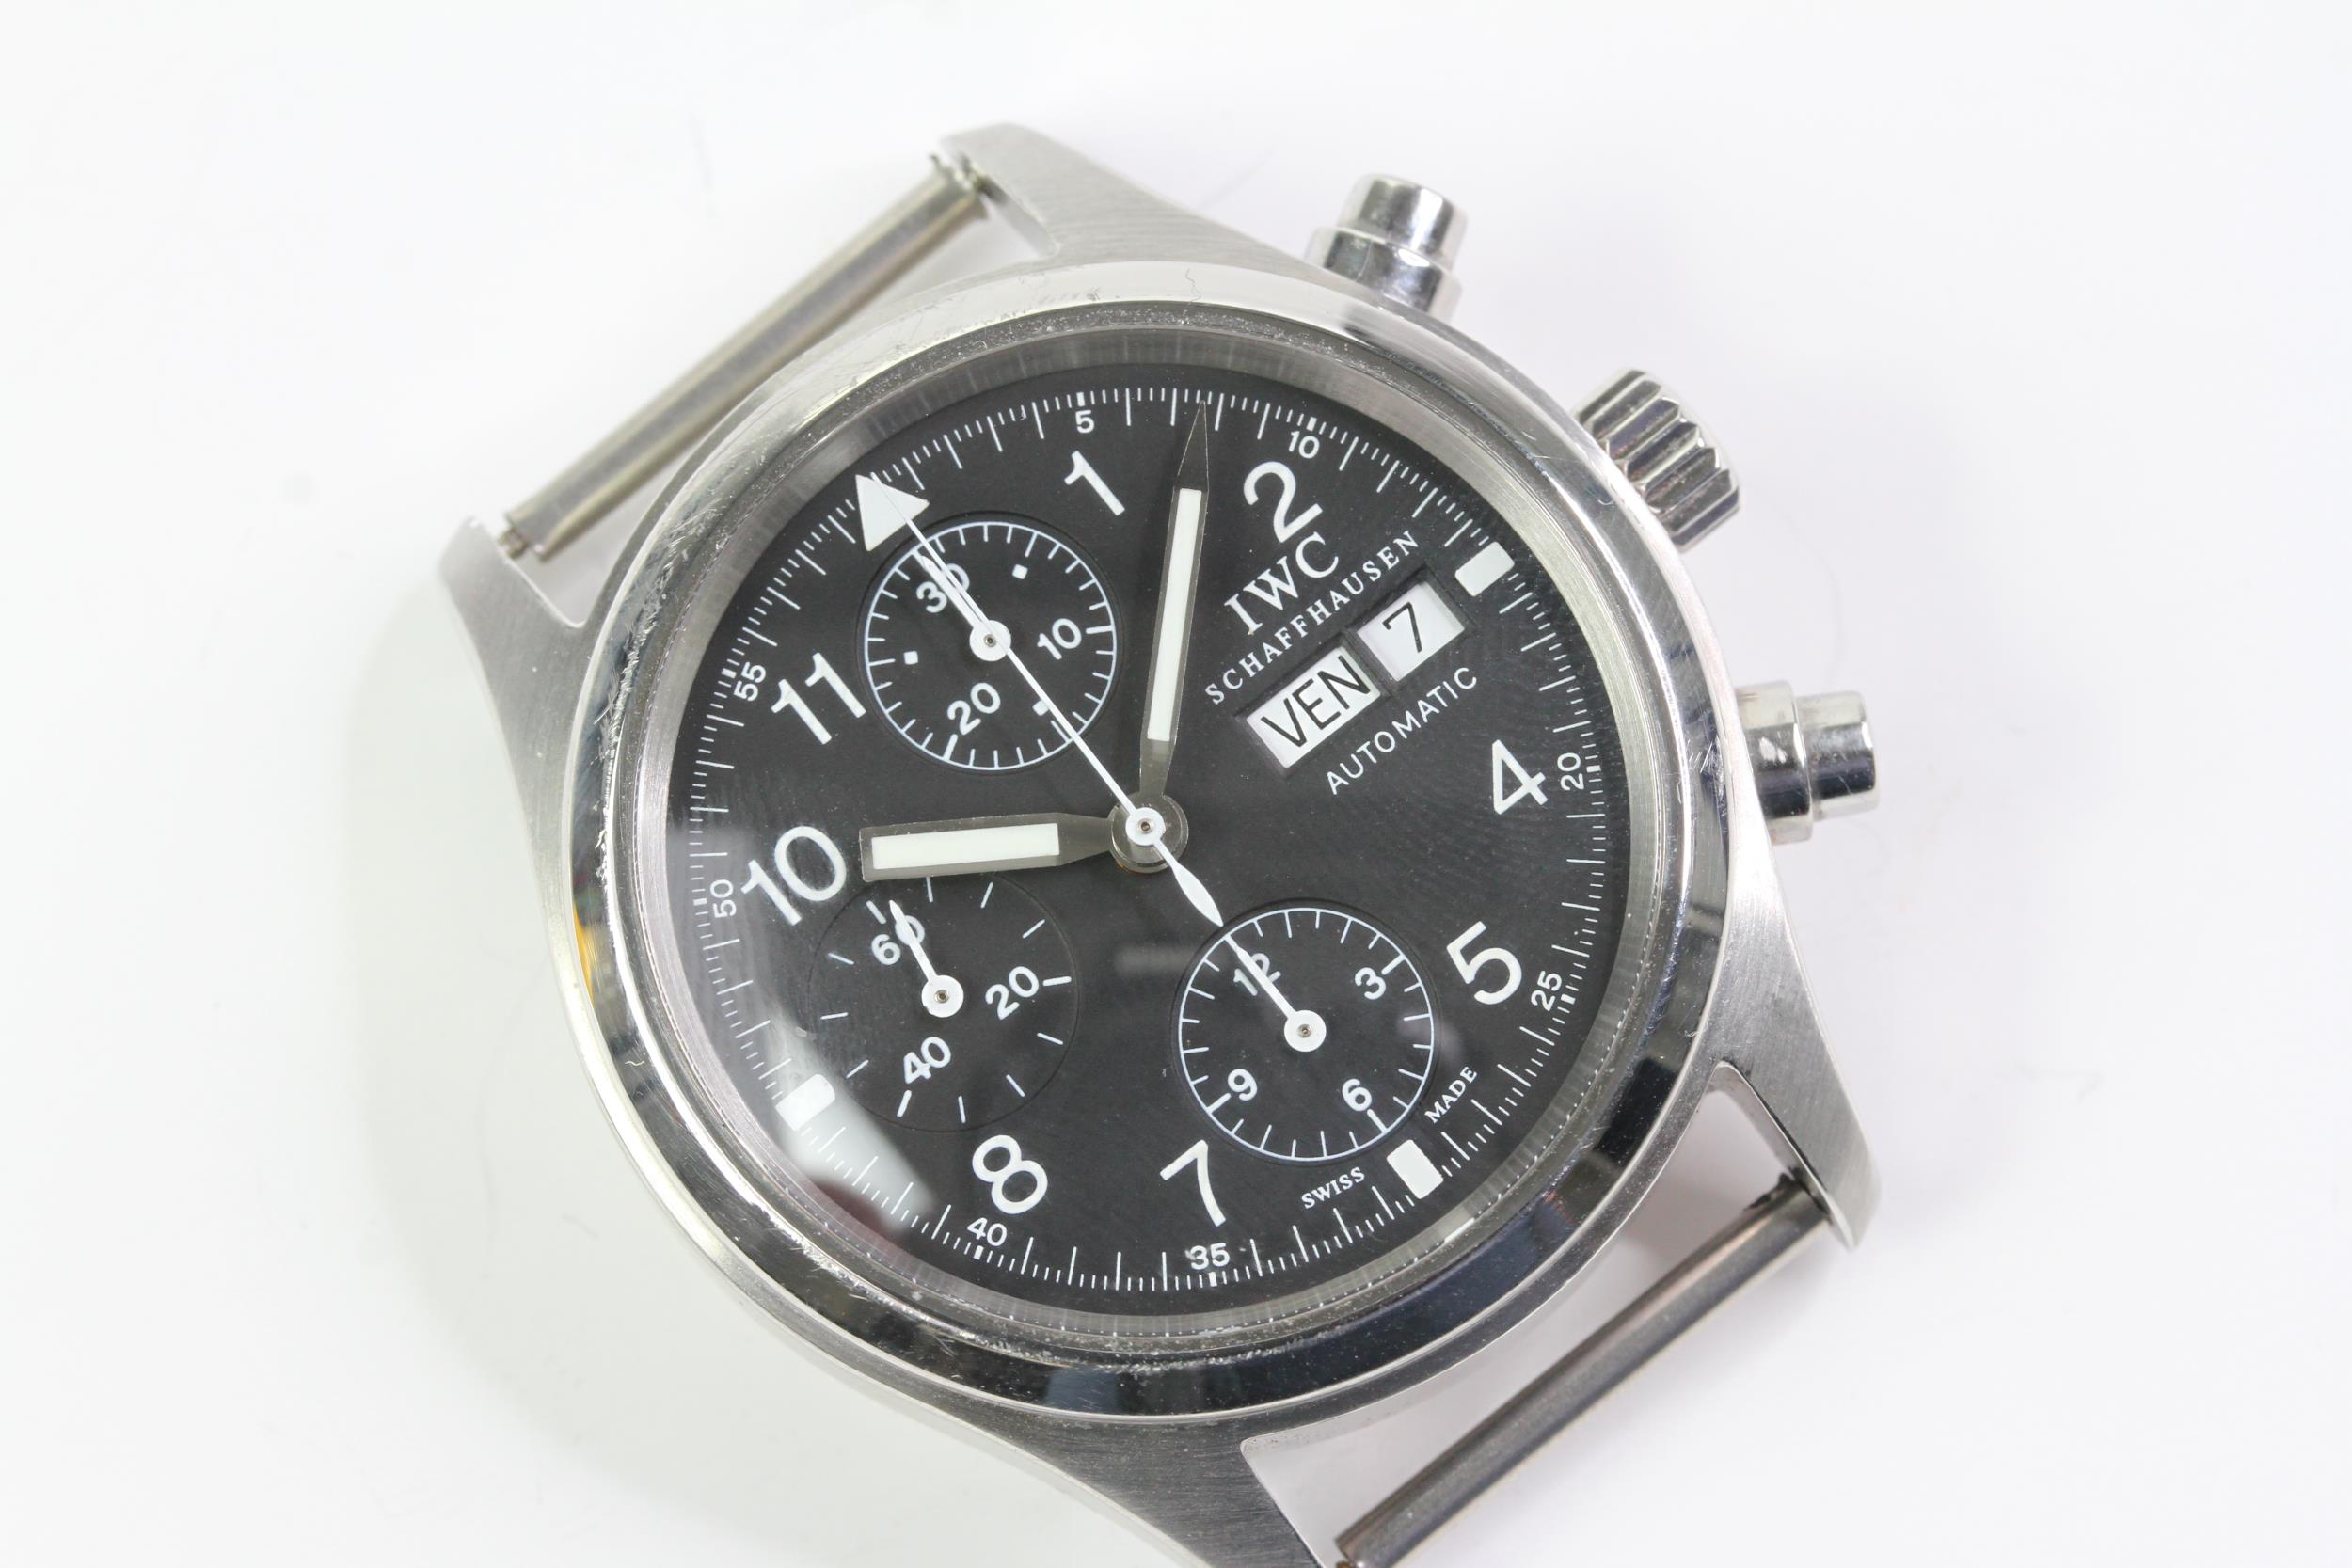 IWC PILOTS CHRONOGRAPH REFERENCE 3706, circular black dial with arabic numeral hour markers, three